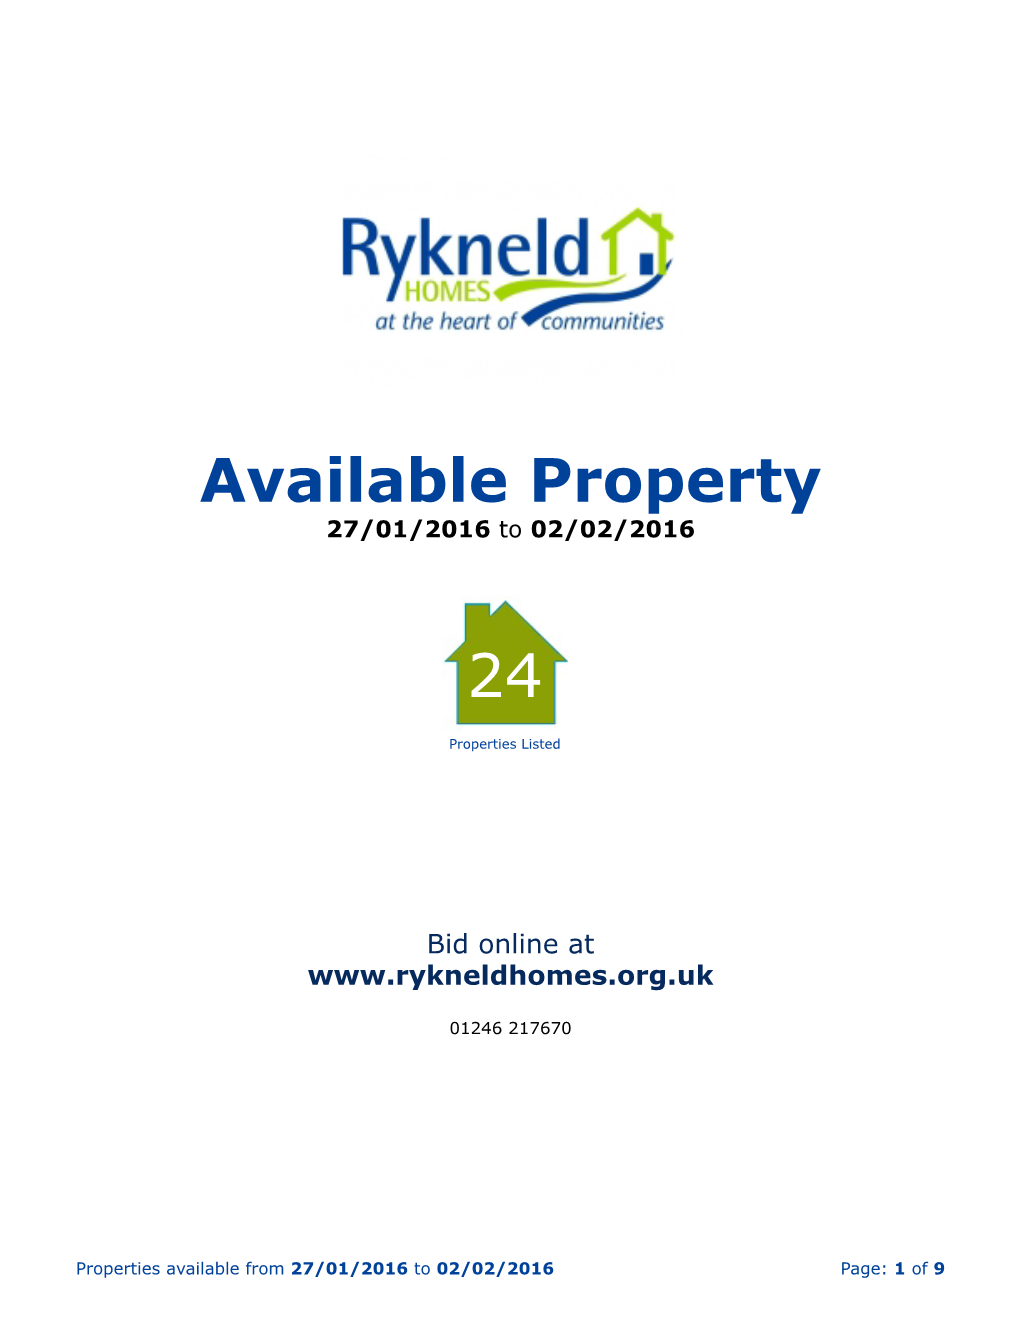 Available Property 24